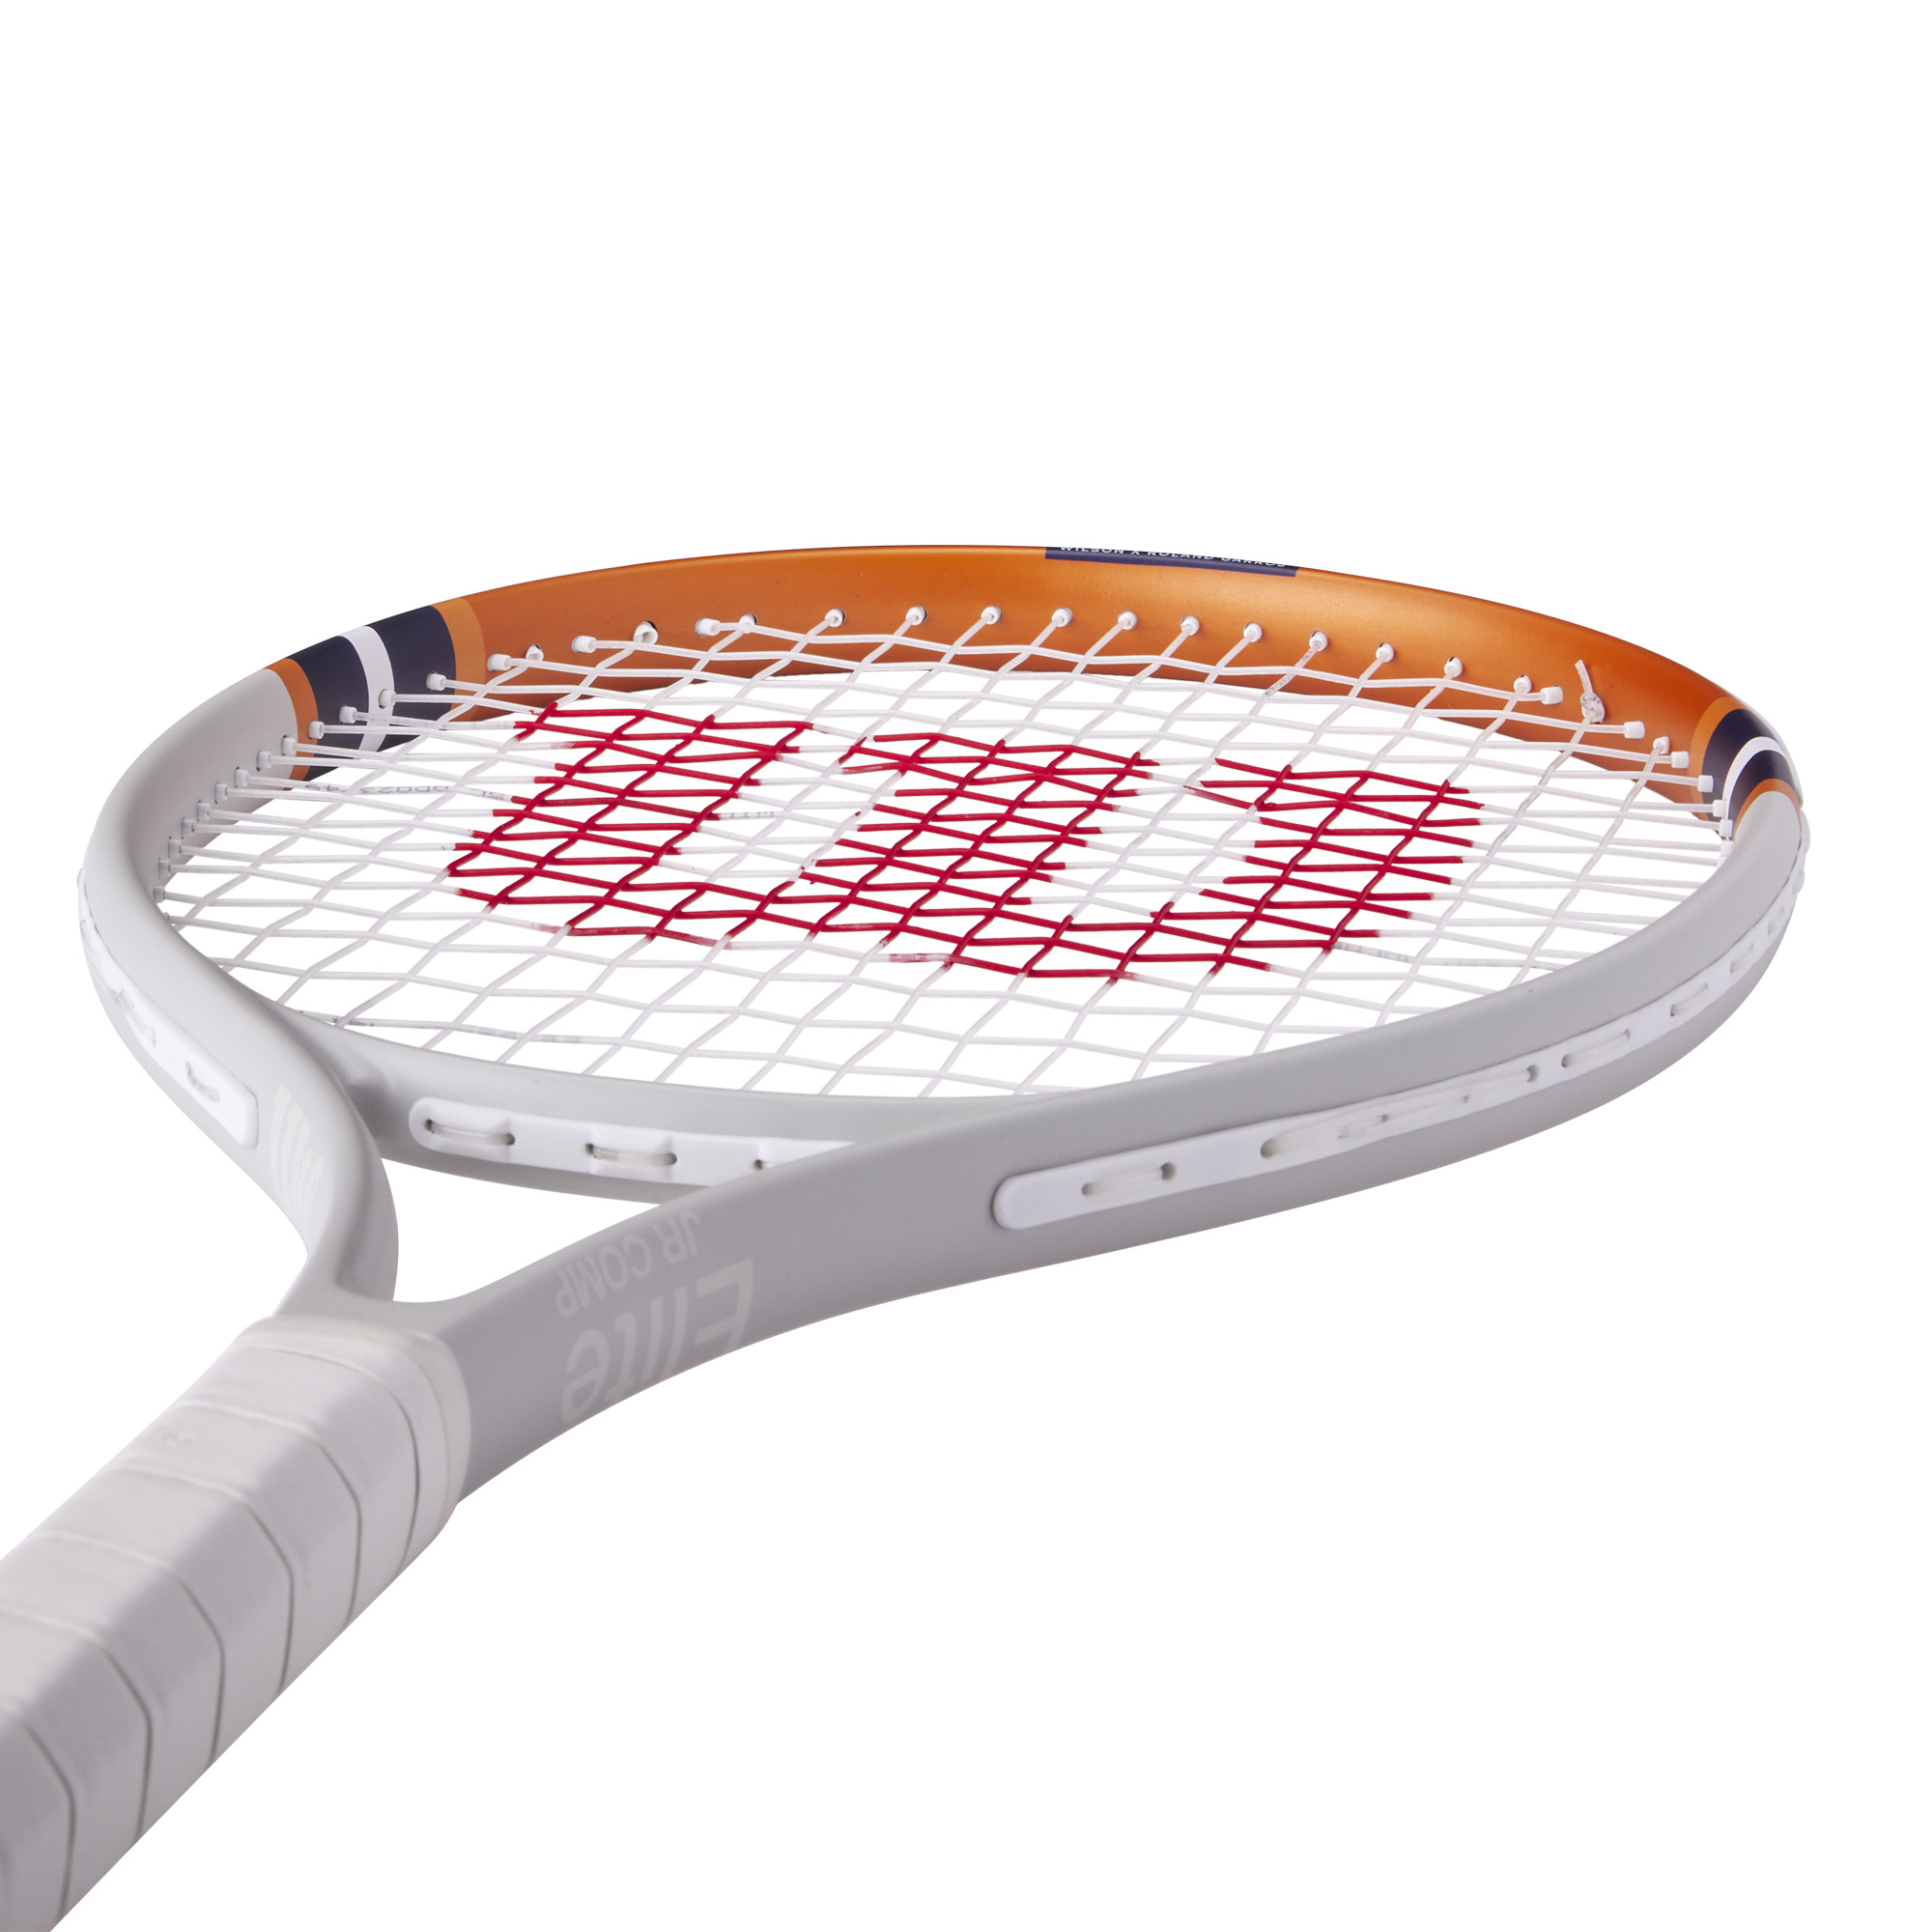 WR127310H_4_Roland_Garros_Elite_Comp_Jr_GY_Clay_WH_NA.png.high-res